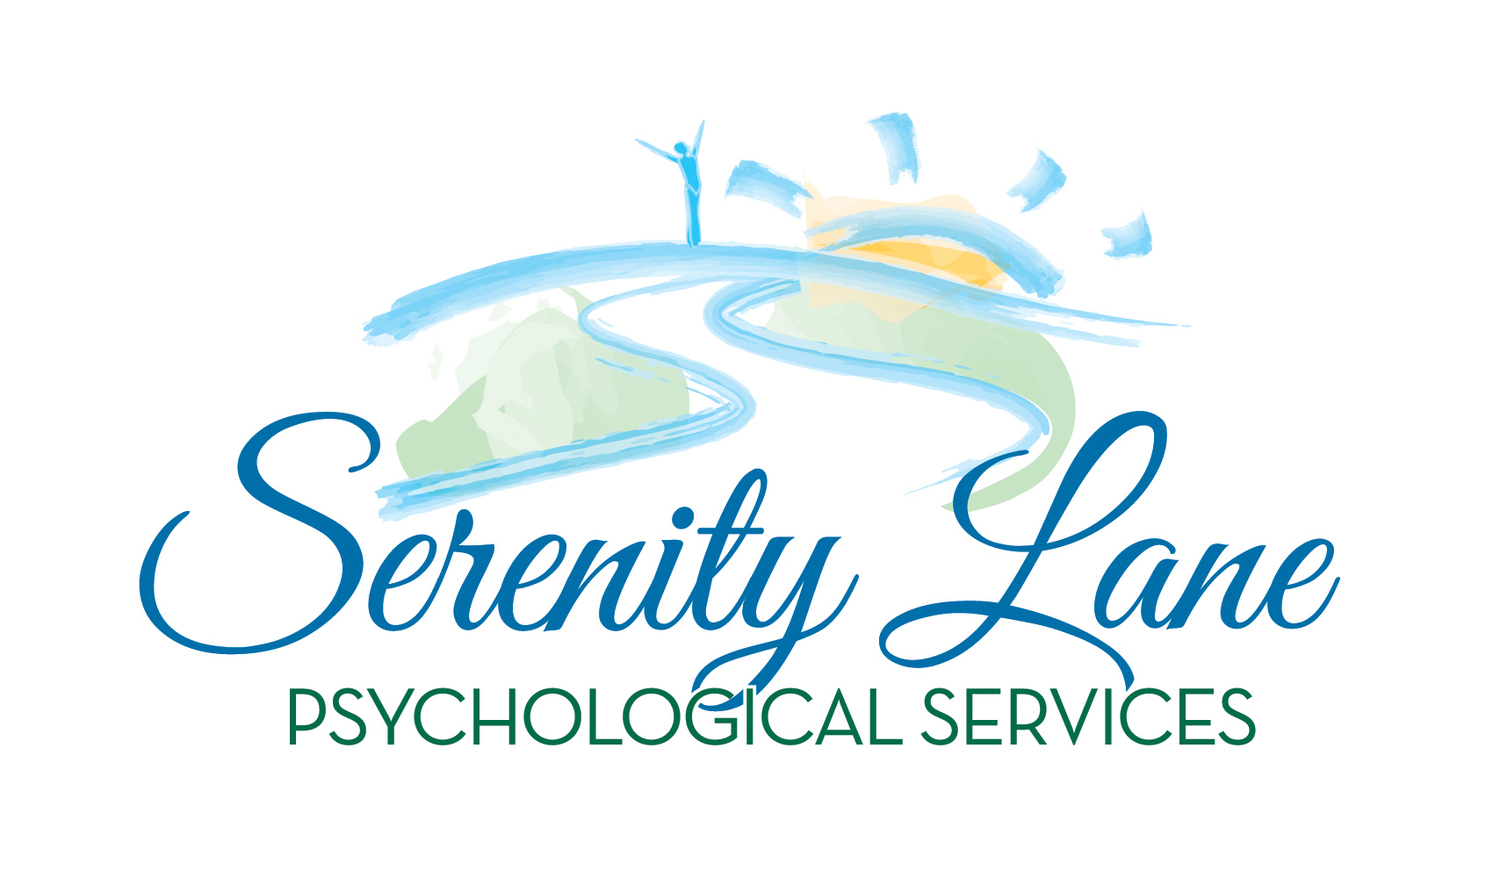 Gallery Photo of Serenity Lane Psychological Services